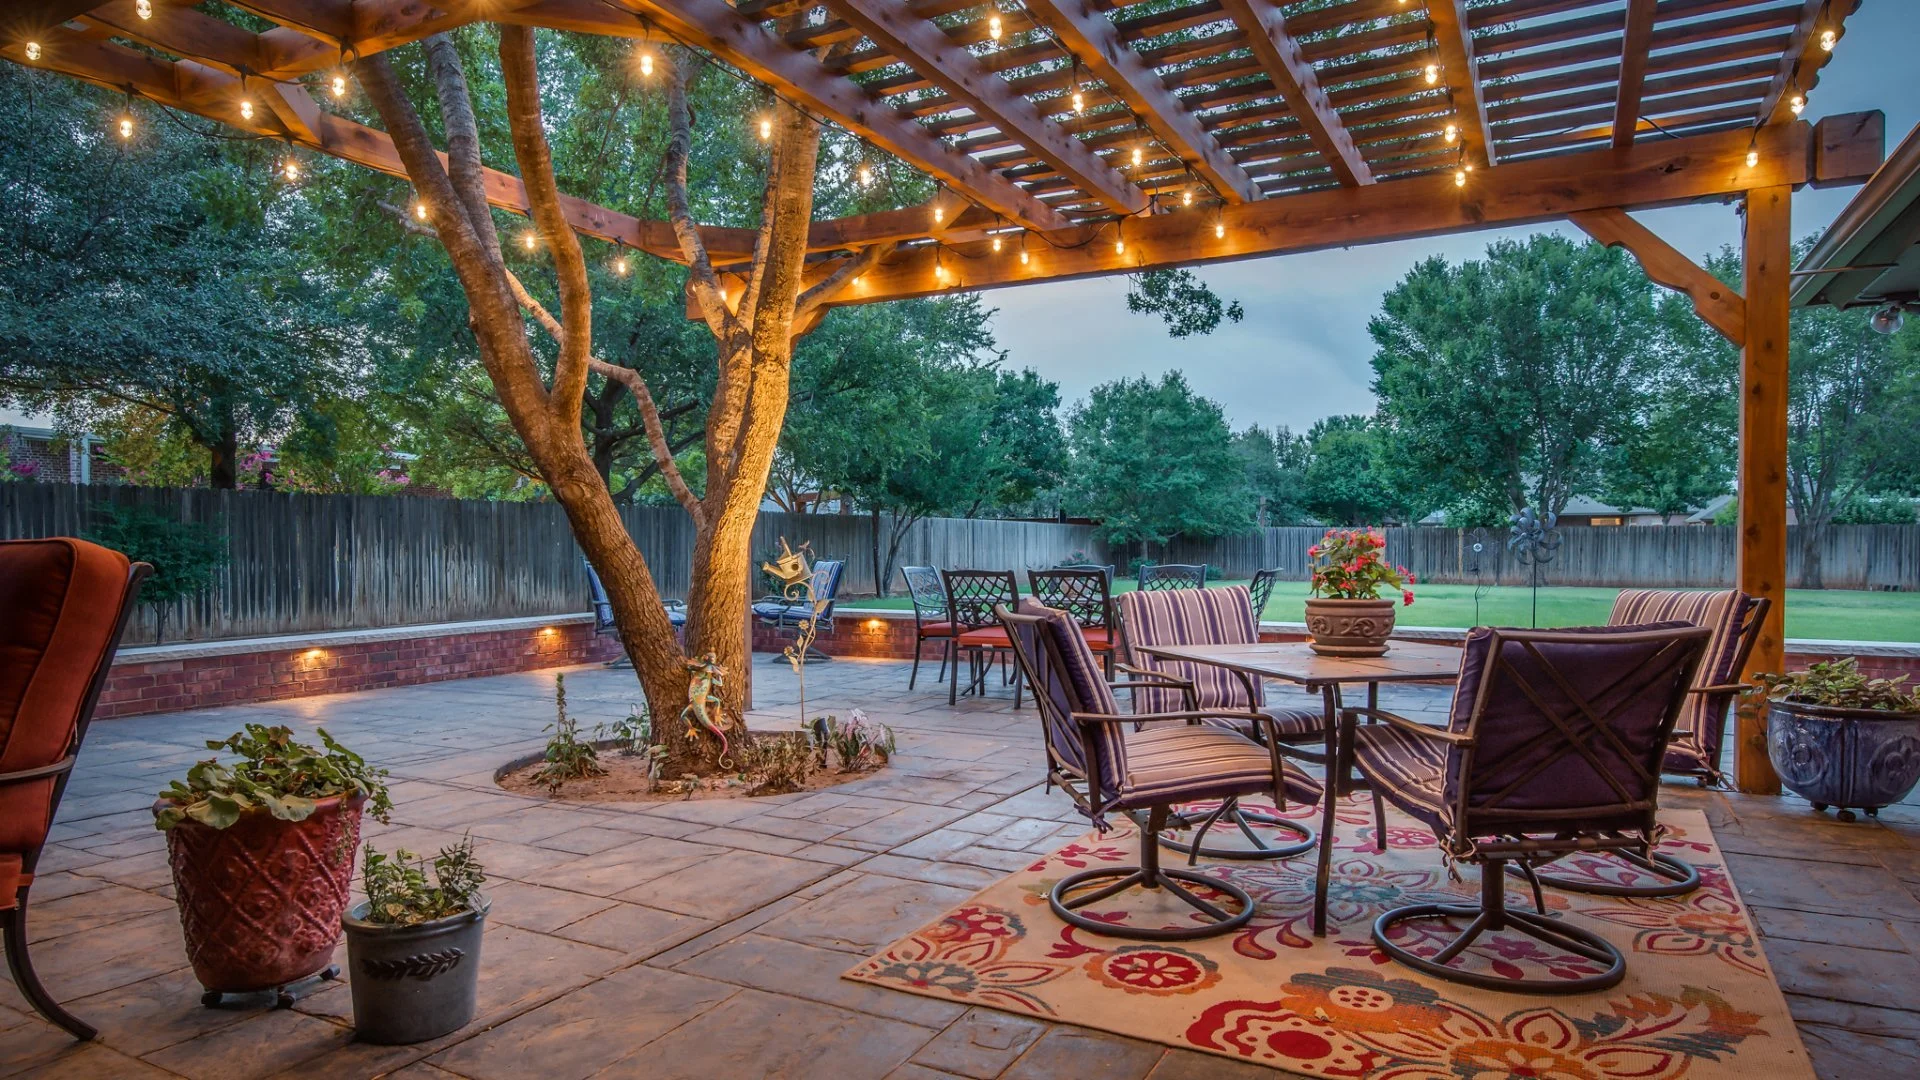 Outdoor living space with paver patio and tree growing through the middle.